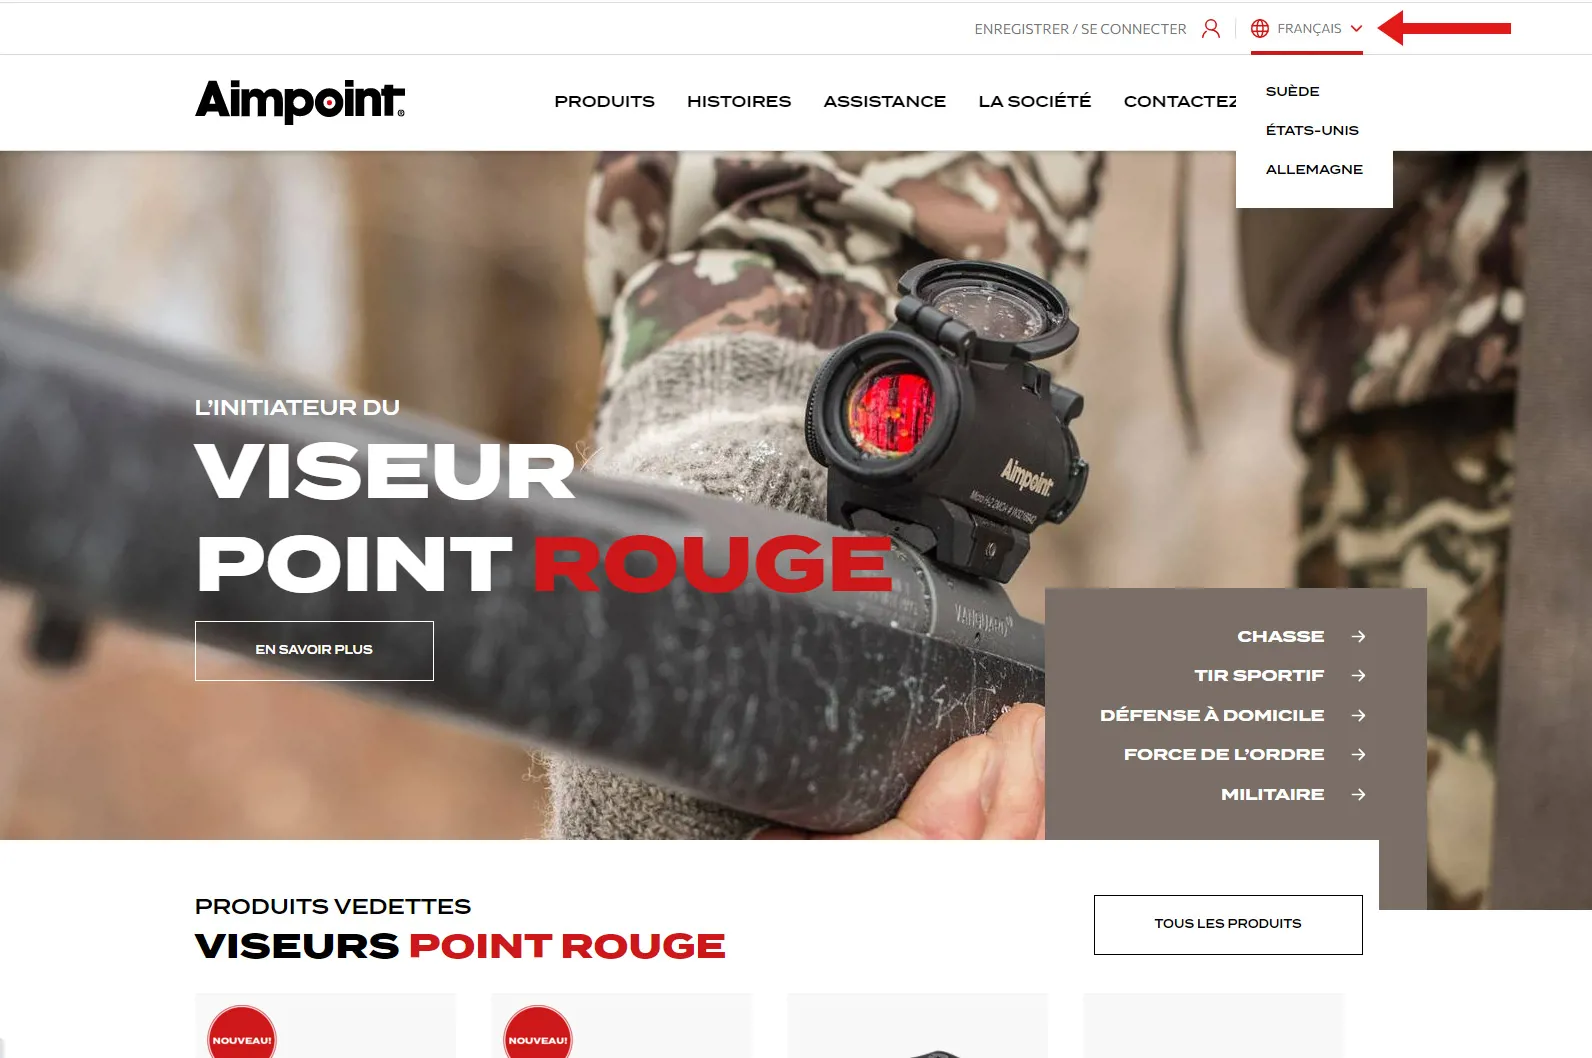 The Aimpoint global website is now multilingual